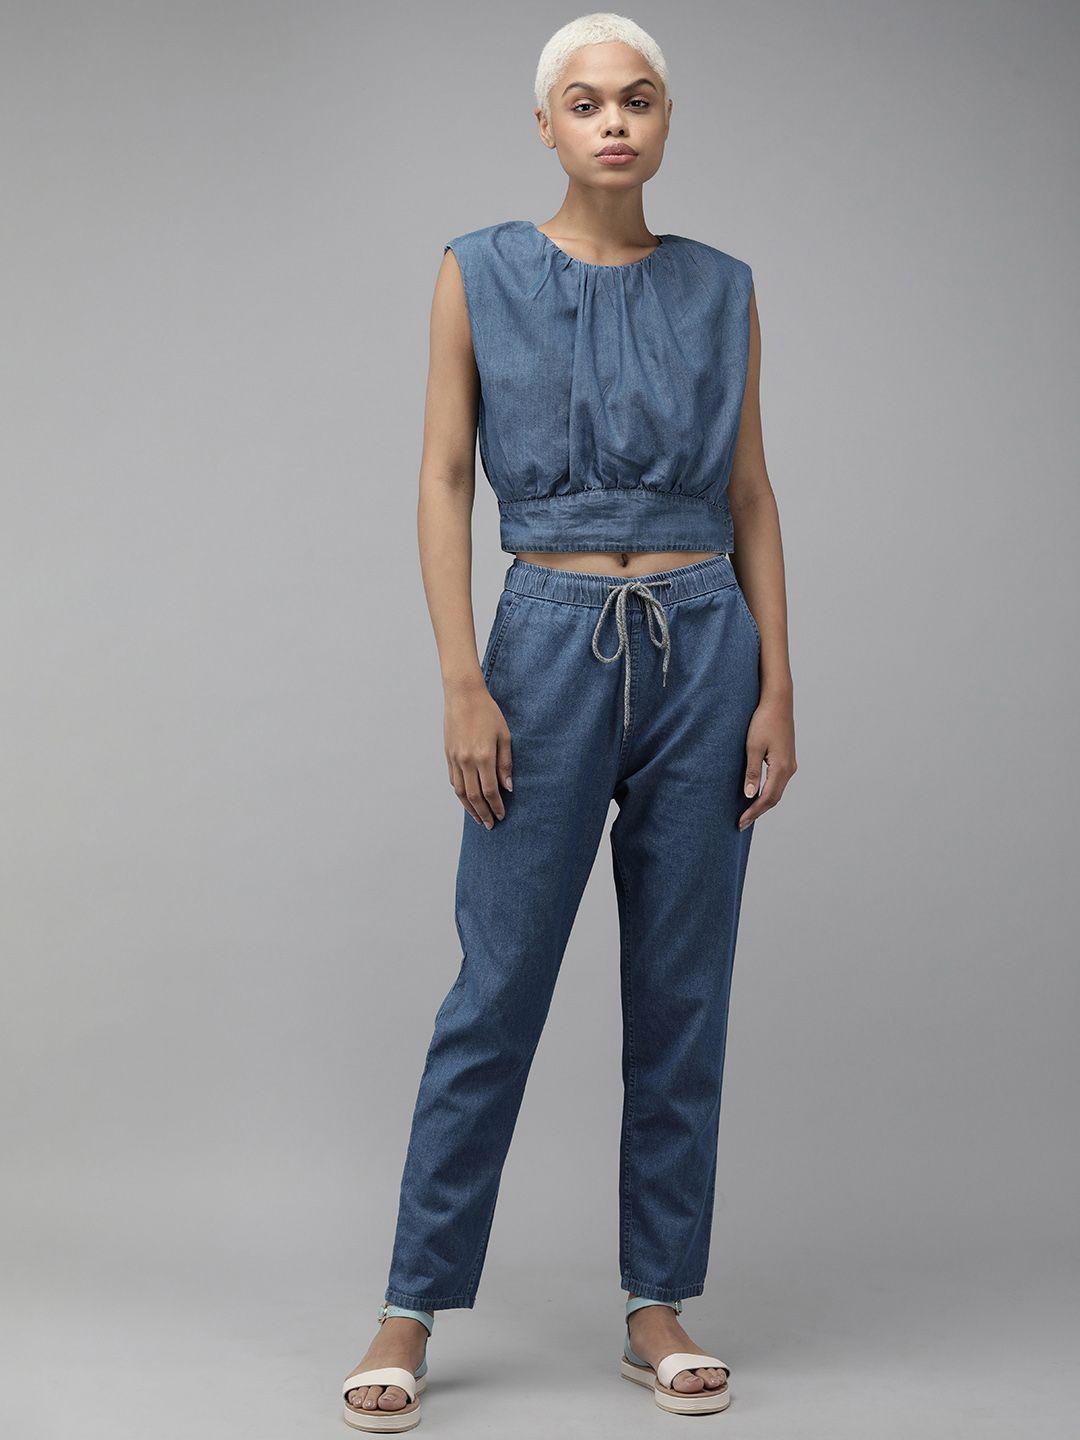 the-roadster-lifestyle-co-women-blue-solid-denim-co-ord-set